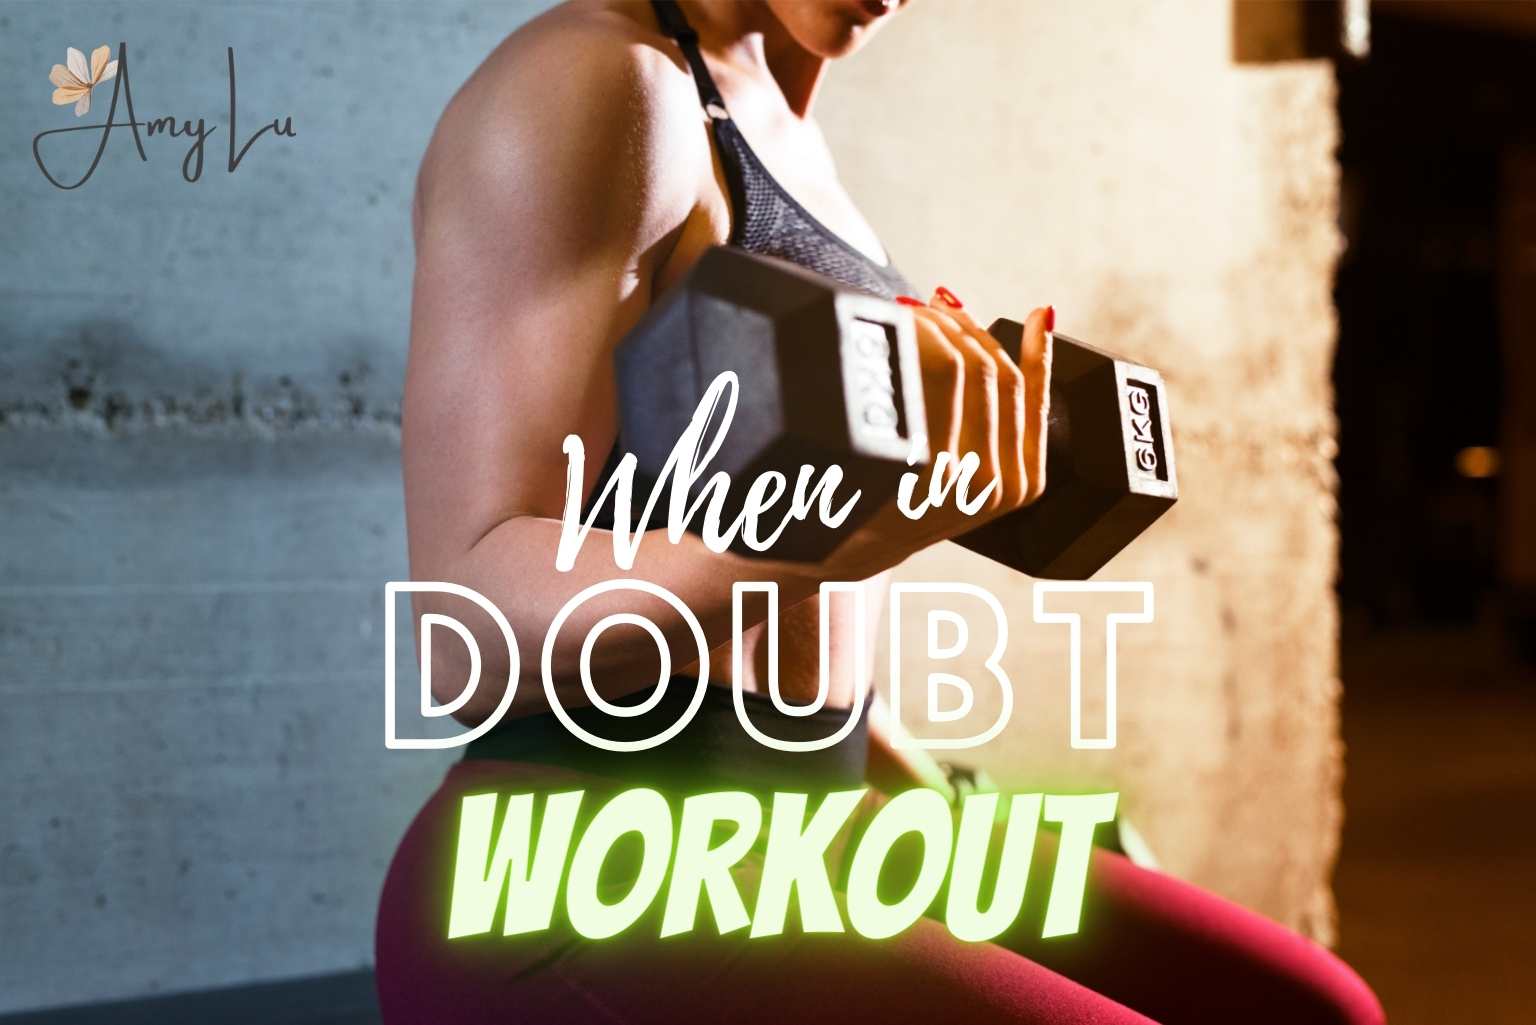 Workout Motivational Quotes For Her